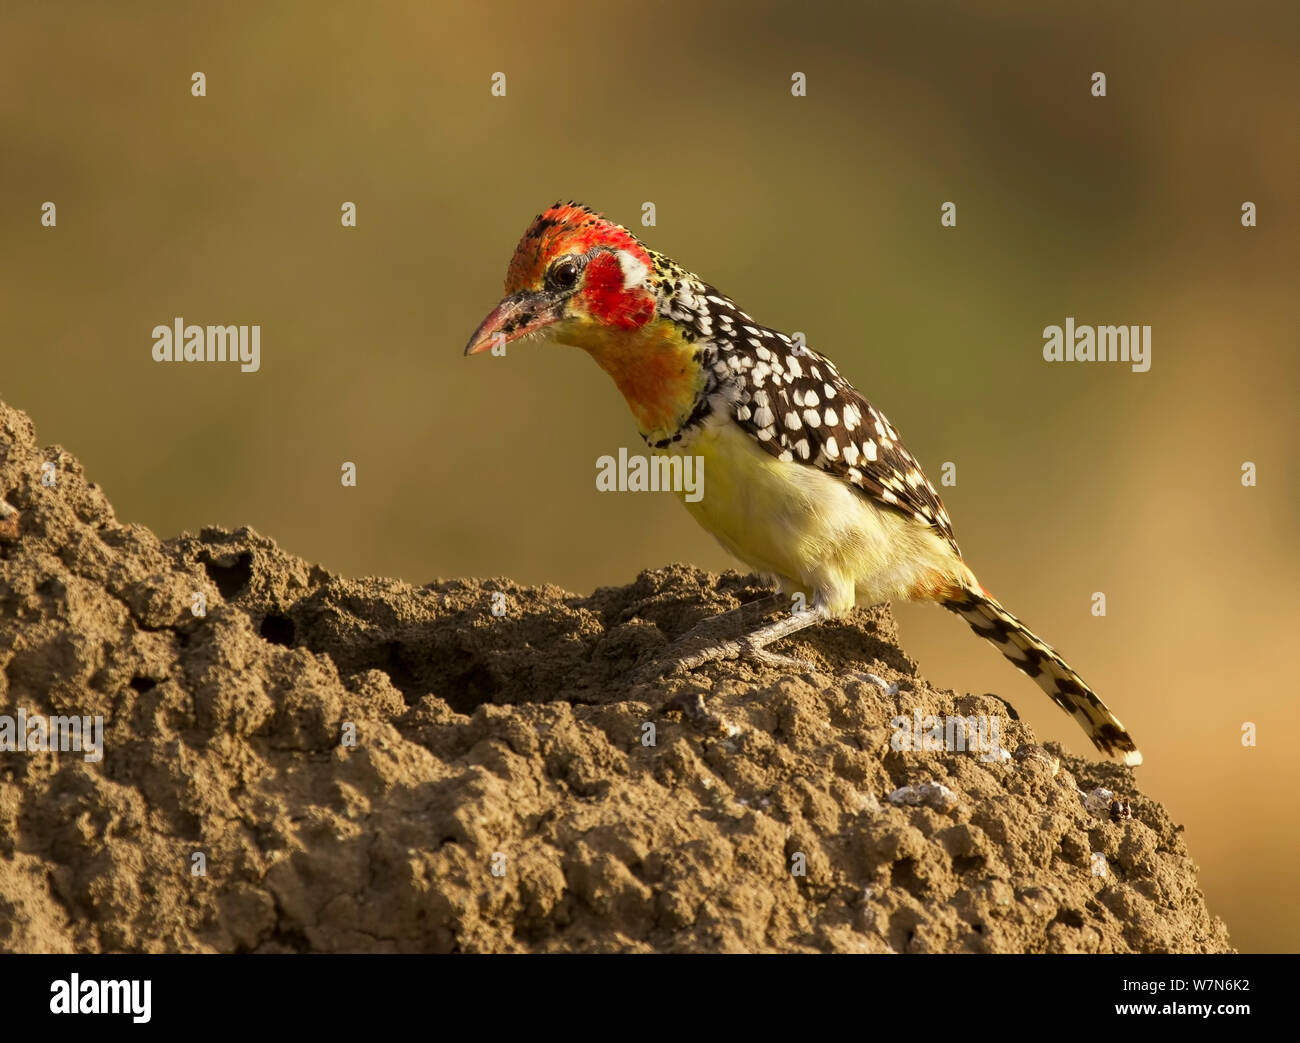 Red and yellow barbet (Trachyphonus erythrocephalus) about to dive into a hole it dug in a termite mound looking for insects, Tarangire National Park, Tanzania Stock Photo